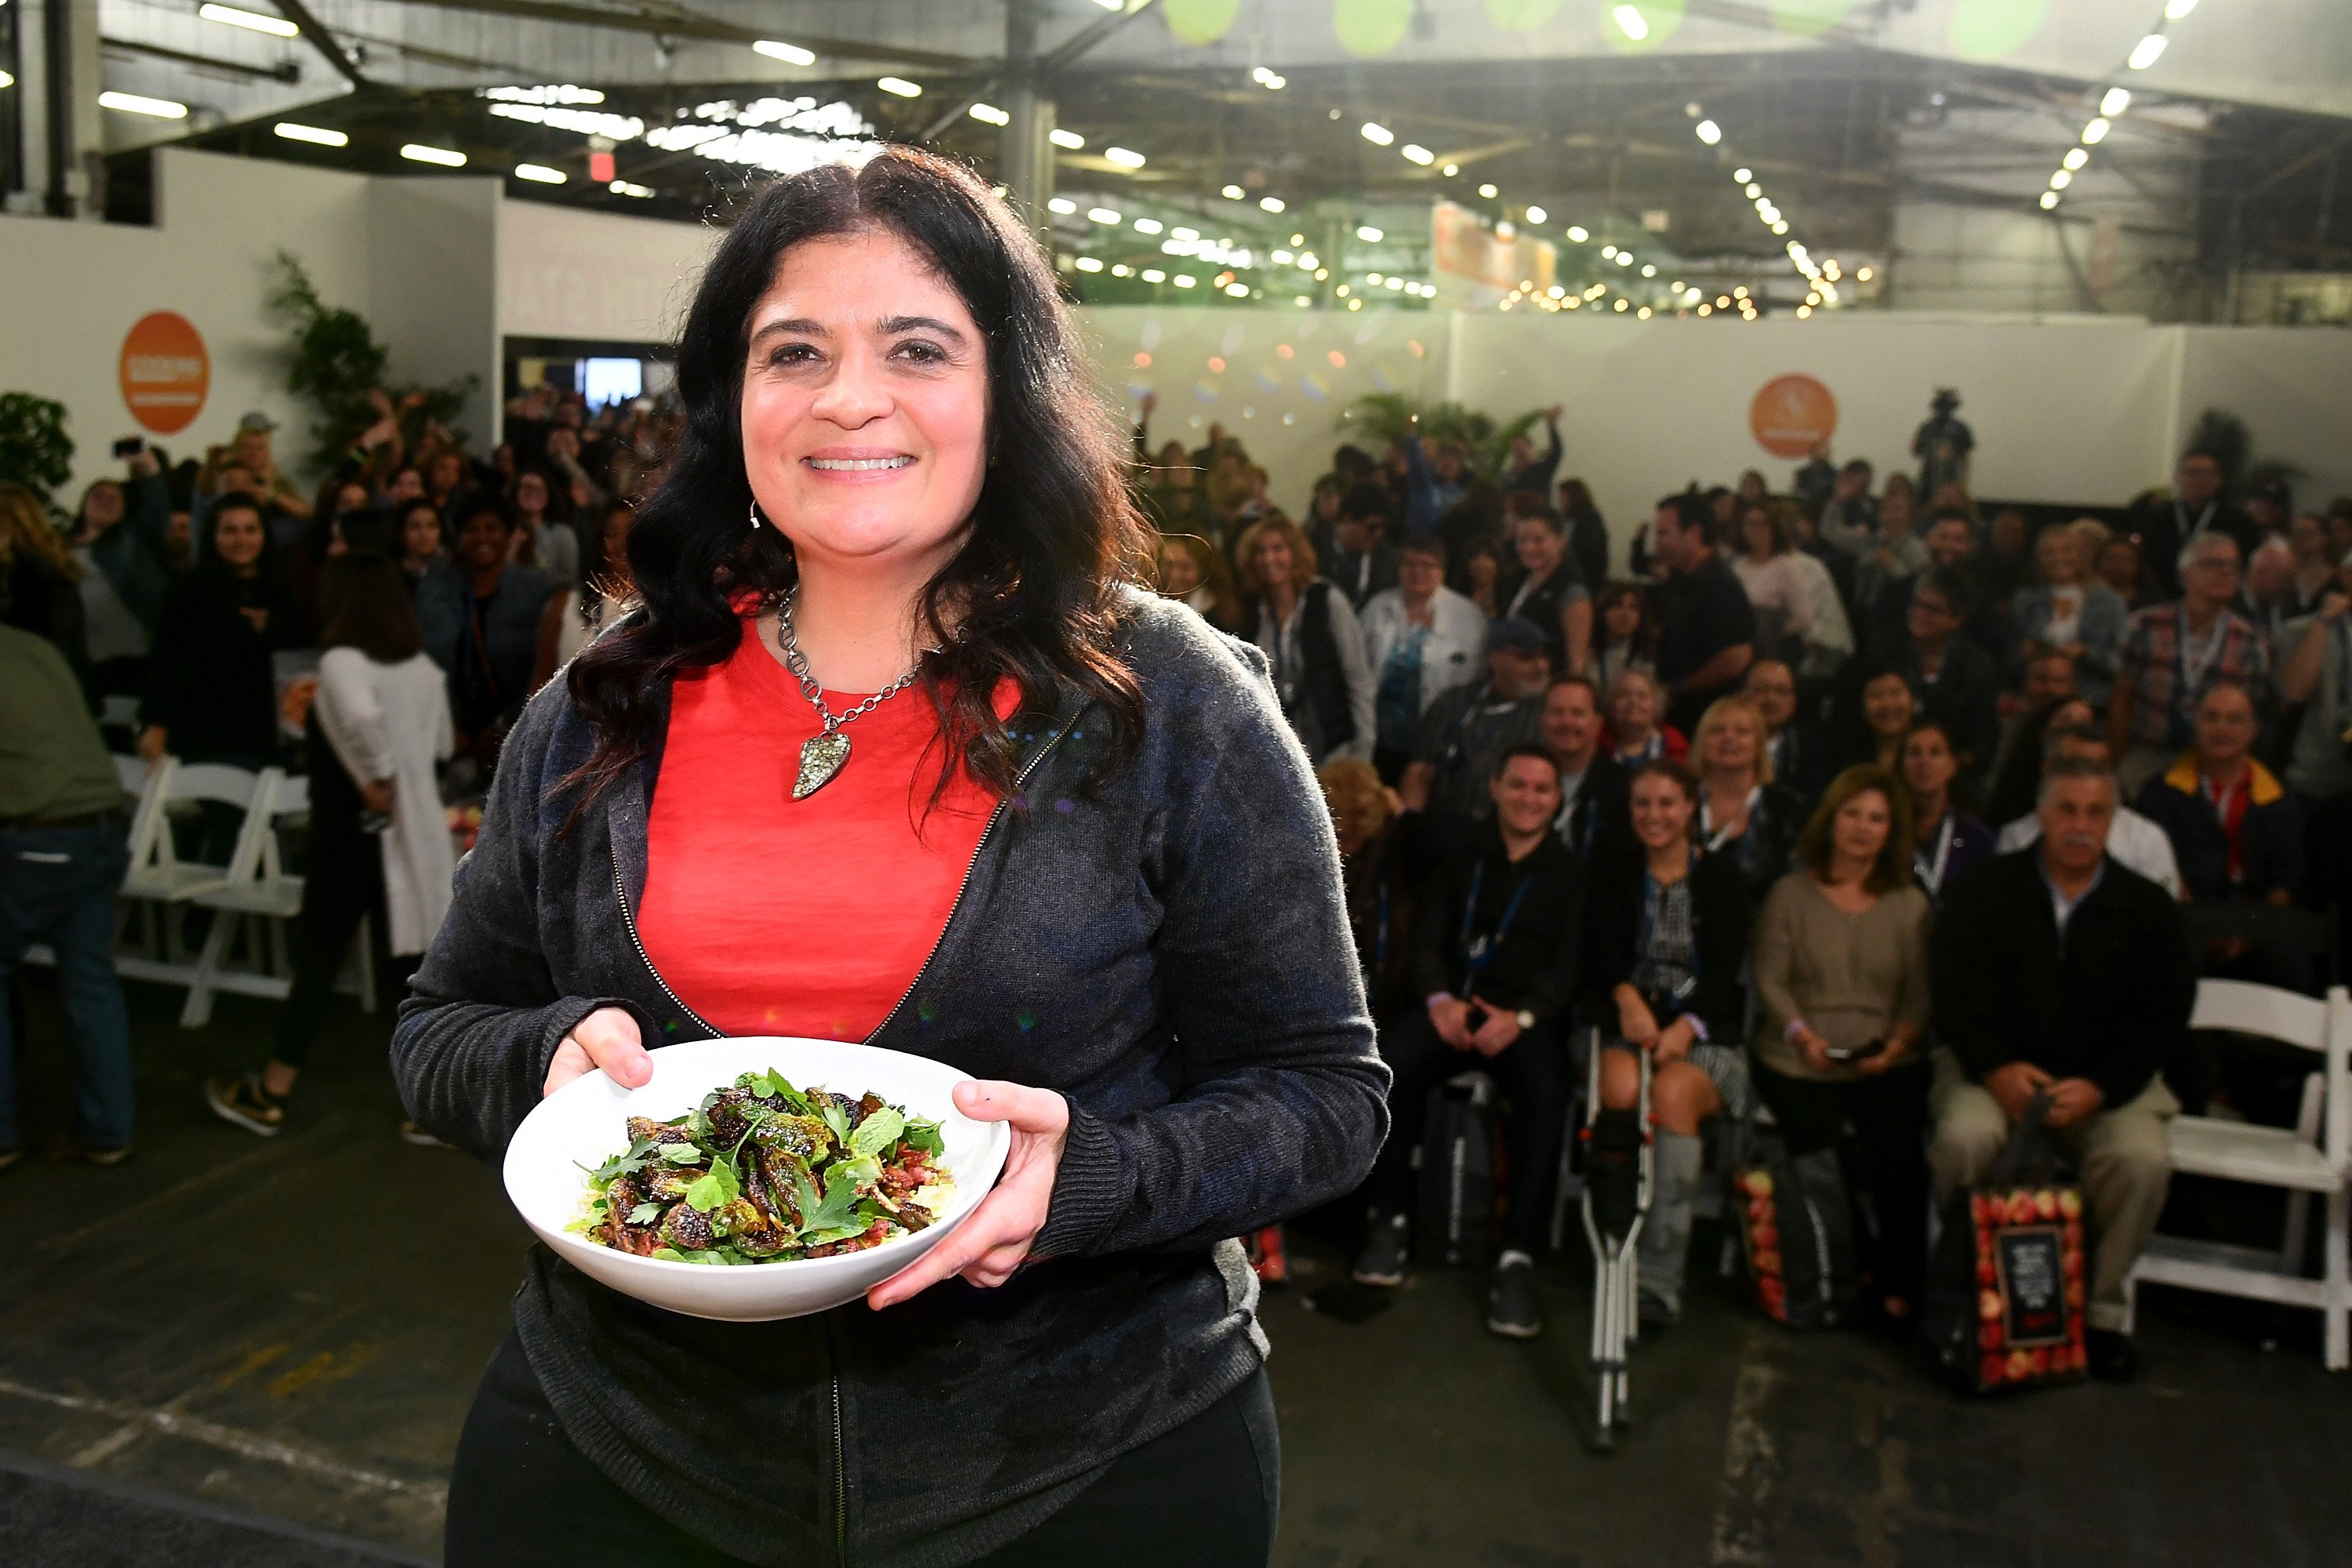 Food Network personality Alex Guarnaschelli wears a red blouse in this photograph.